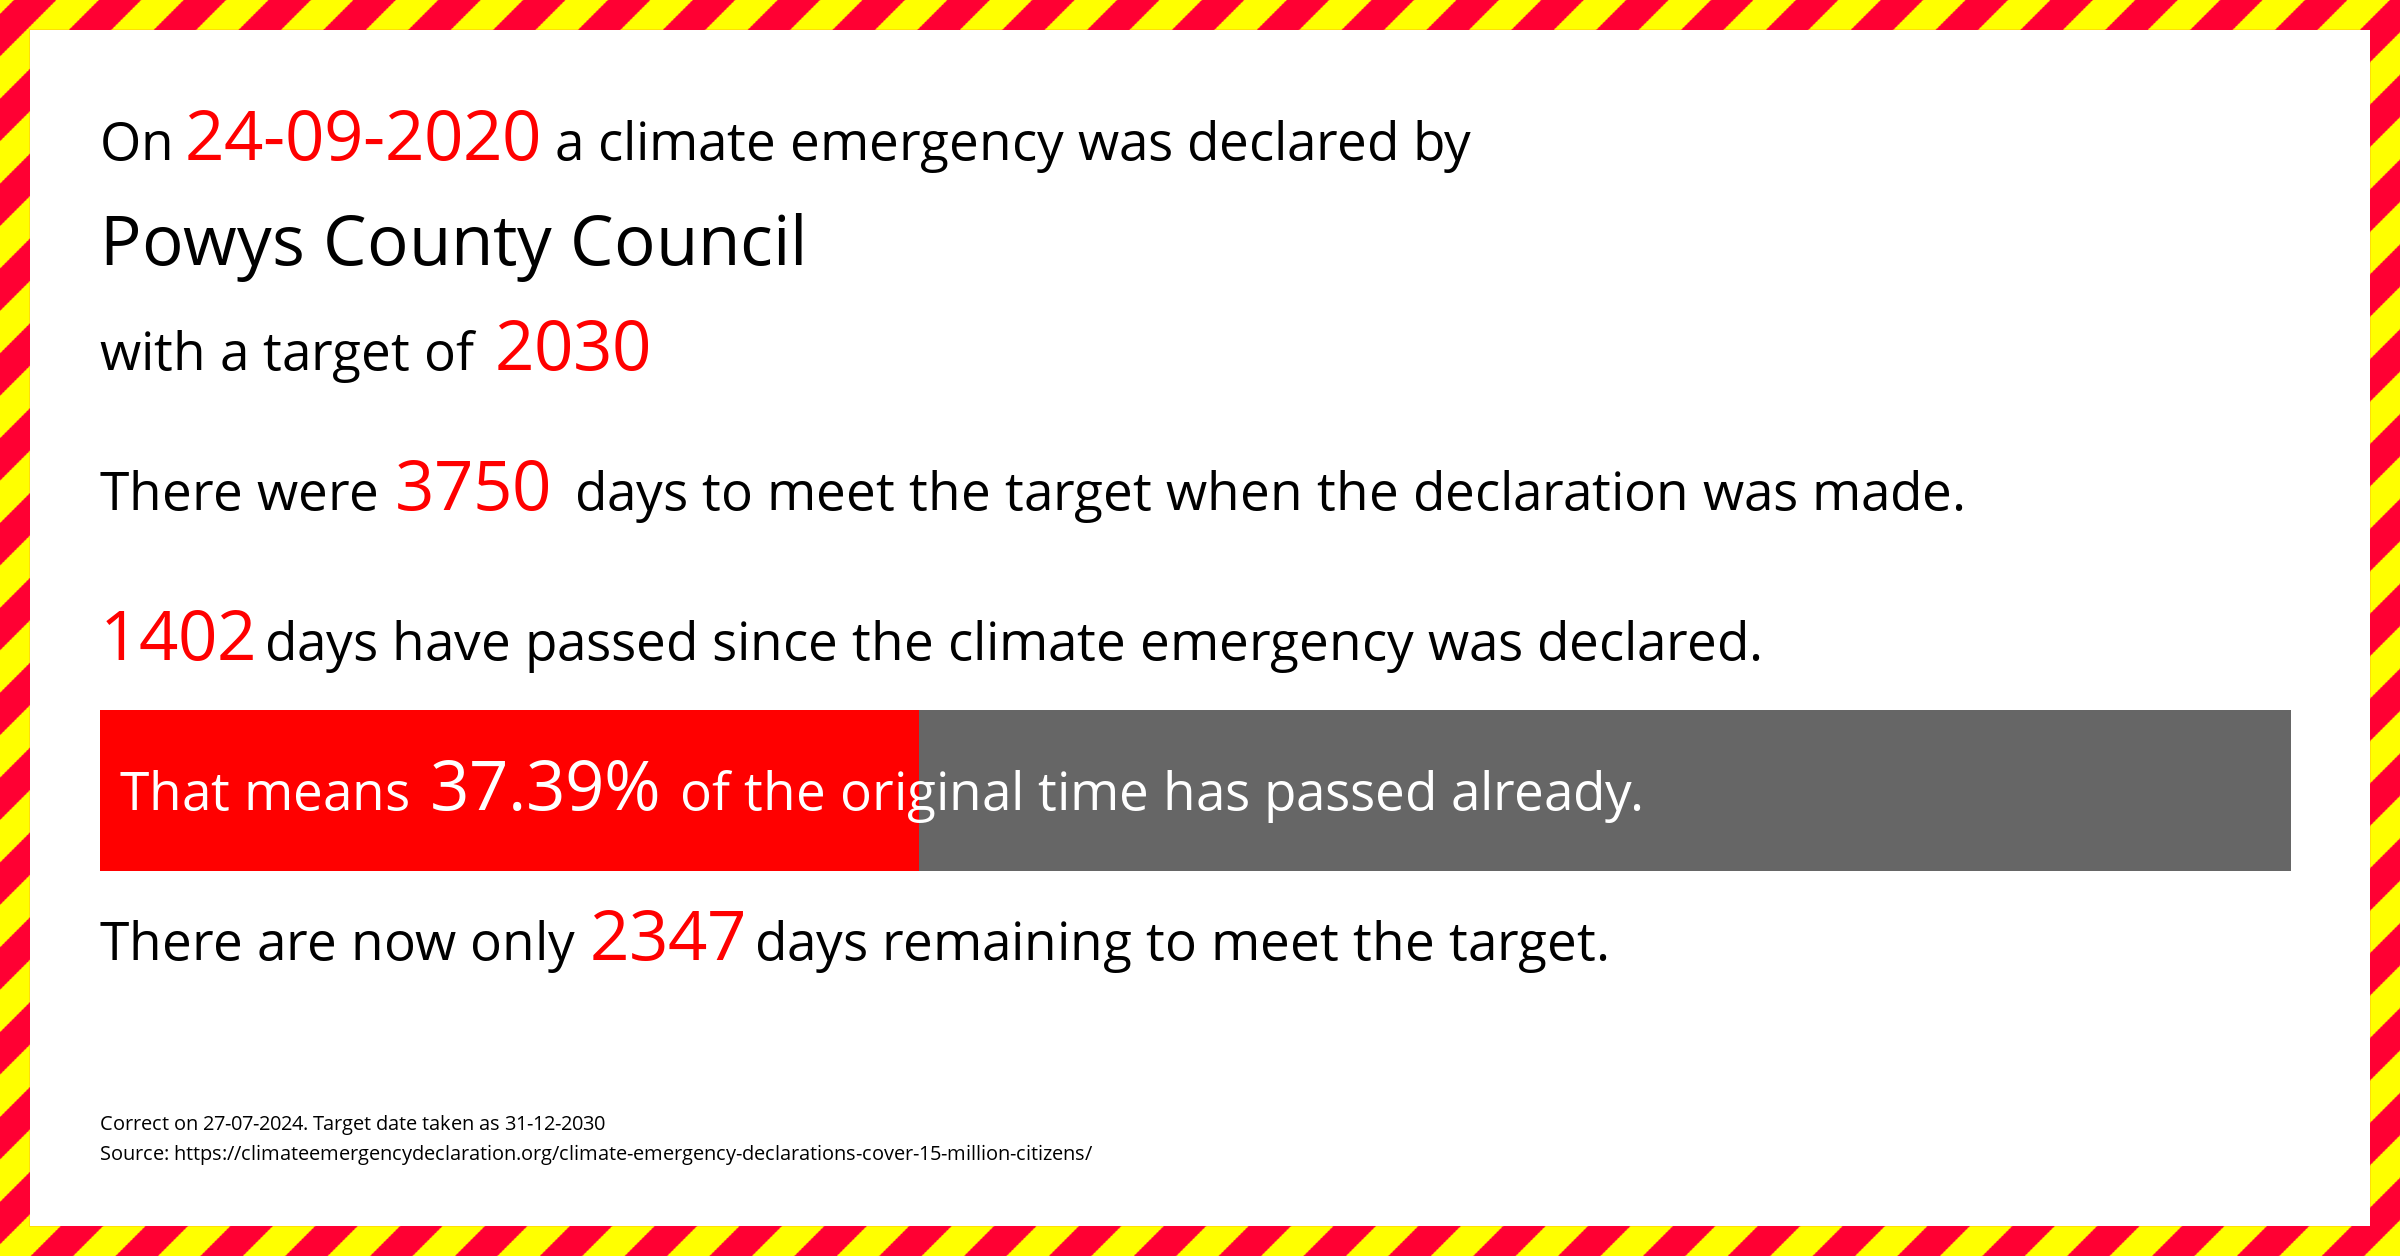 Powys County Council  declared a Climate emergency on Thursday 24th September 2020, with a target of 2030.